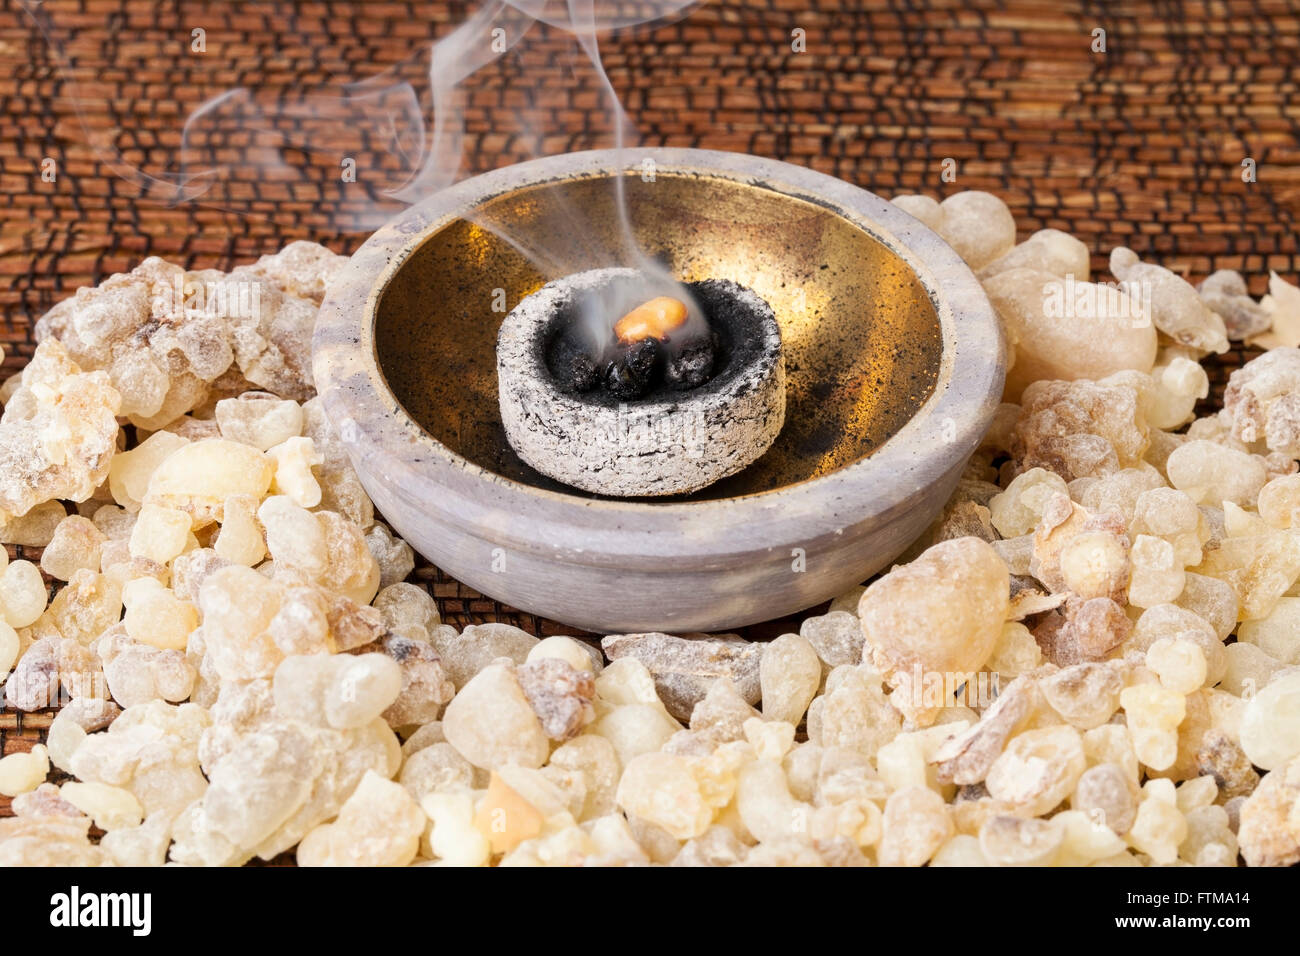 Frankincense burning on a hot coal. Frankincense is an aromatic resin, used for religious rites, incense and perfumes. Stock Photo